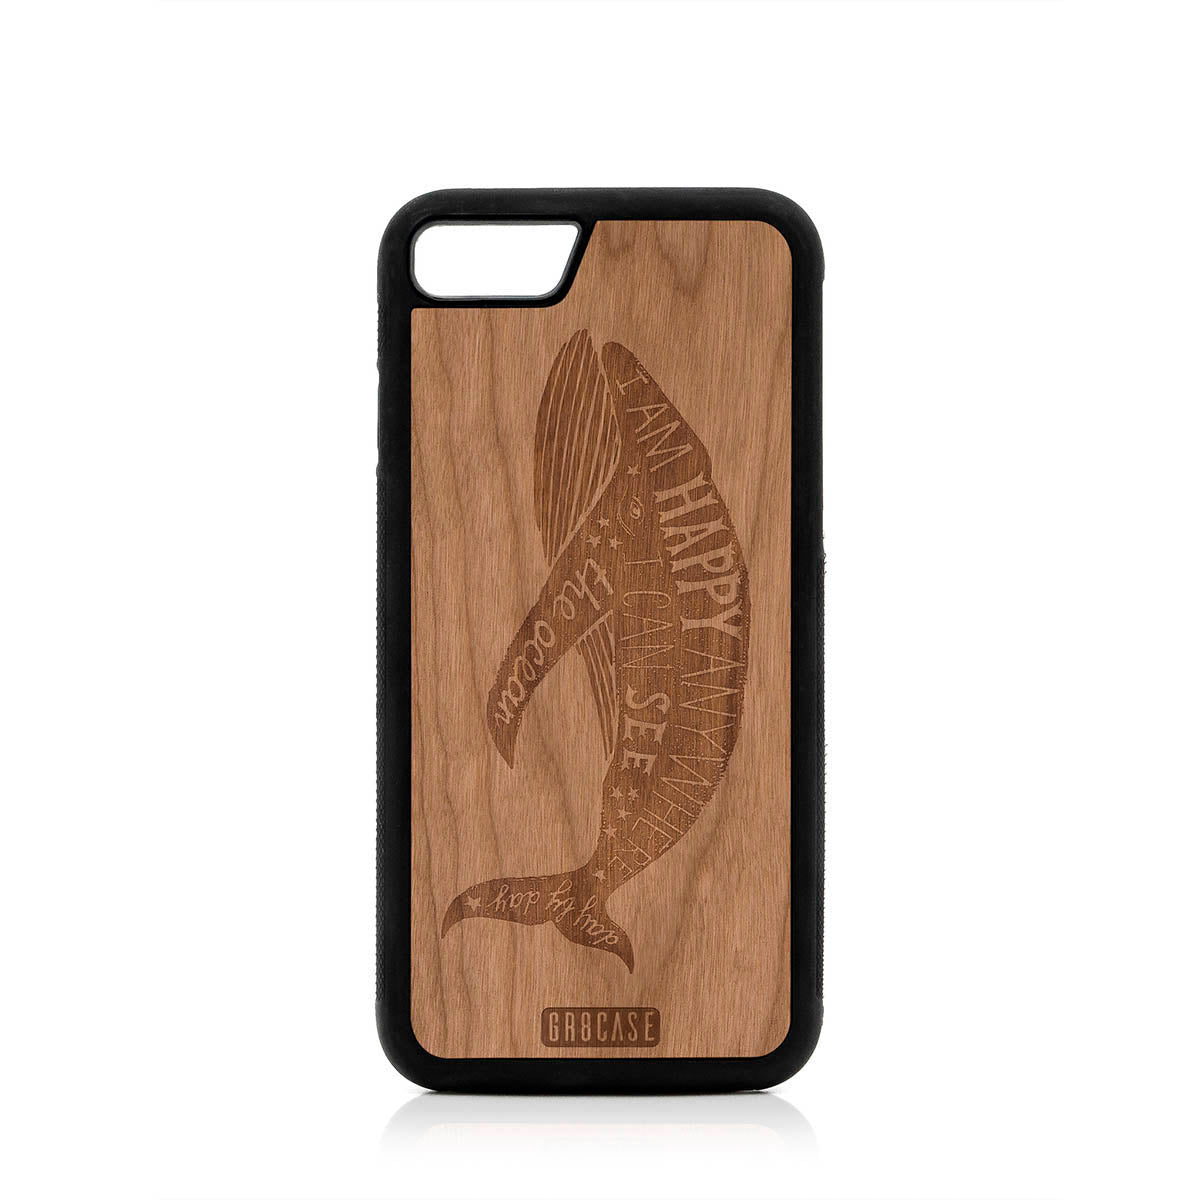 I'm Happy Anywhere I Can See The Ocean (Whale) Design Wood Case For iPhone 7/8